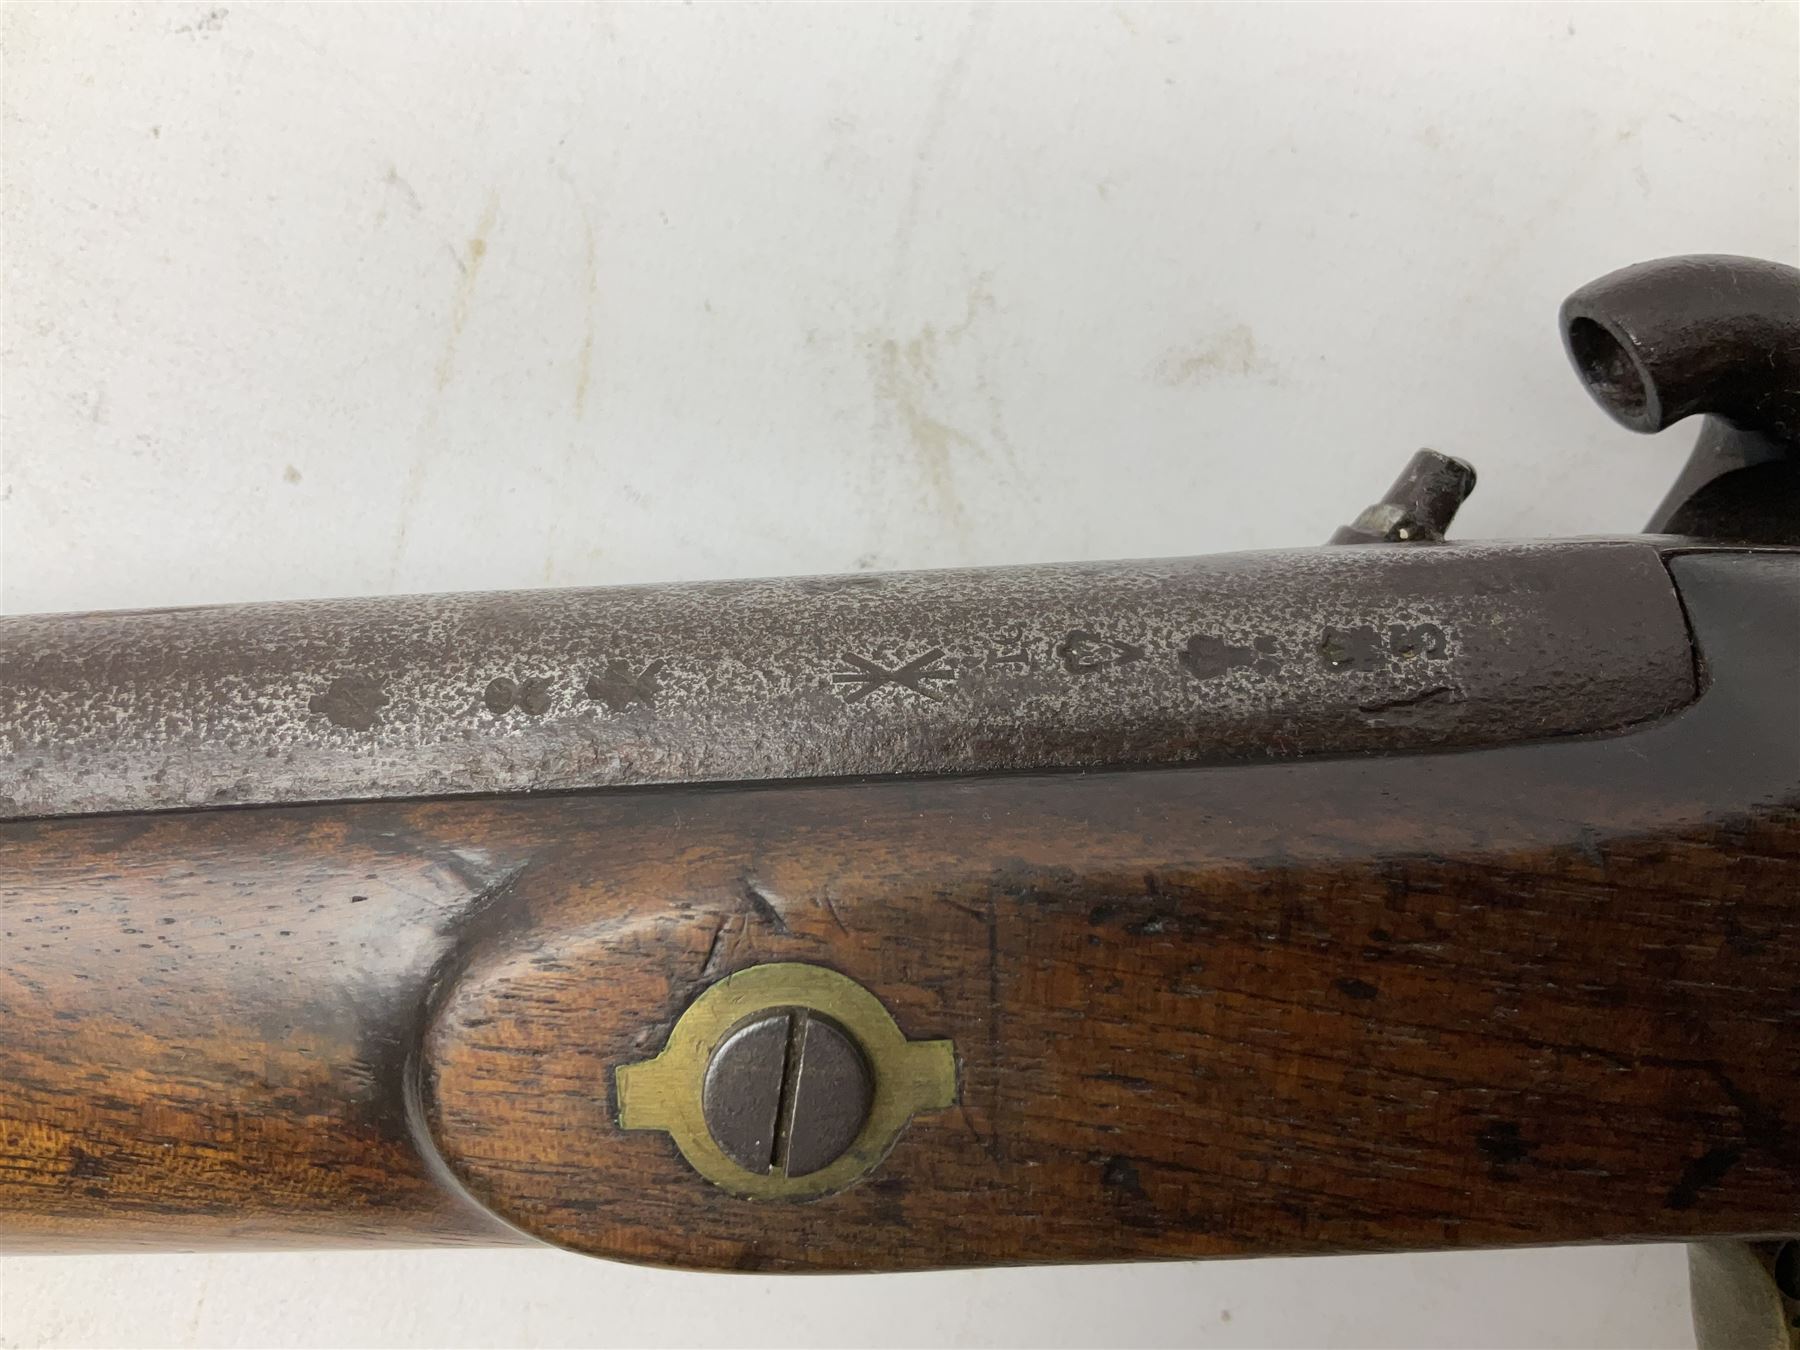 19th century Enfield .577 percussion gun - Image 13 of 16